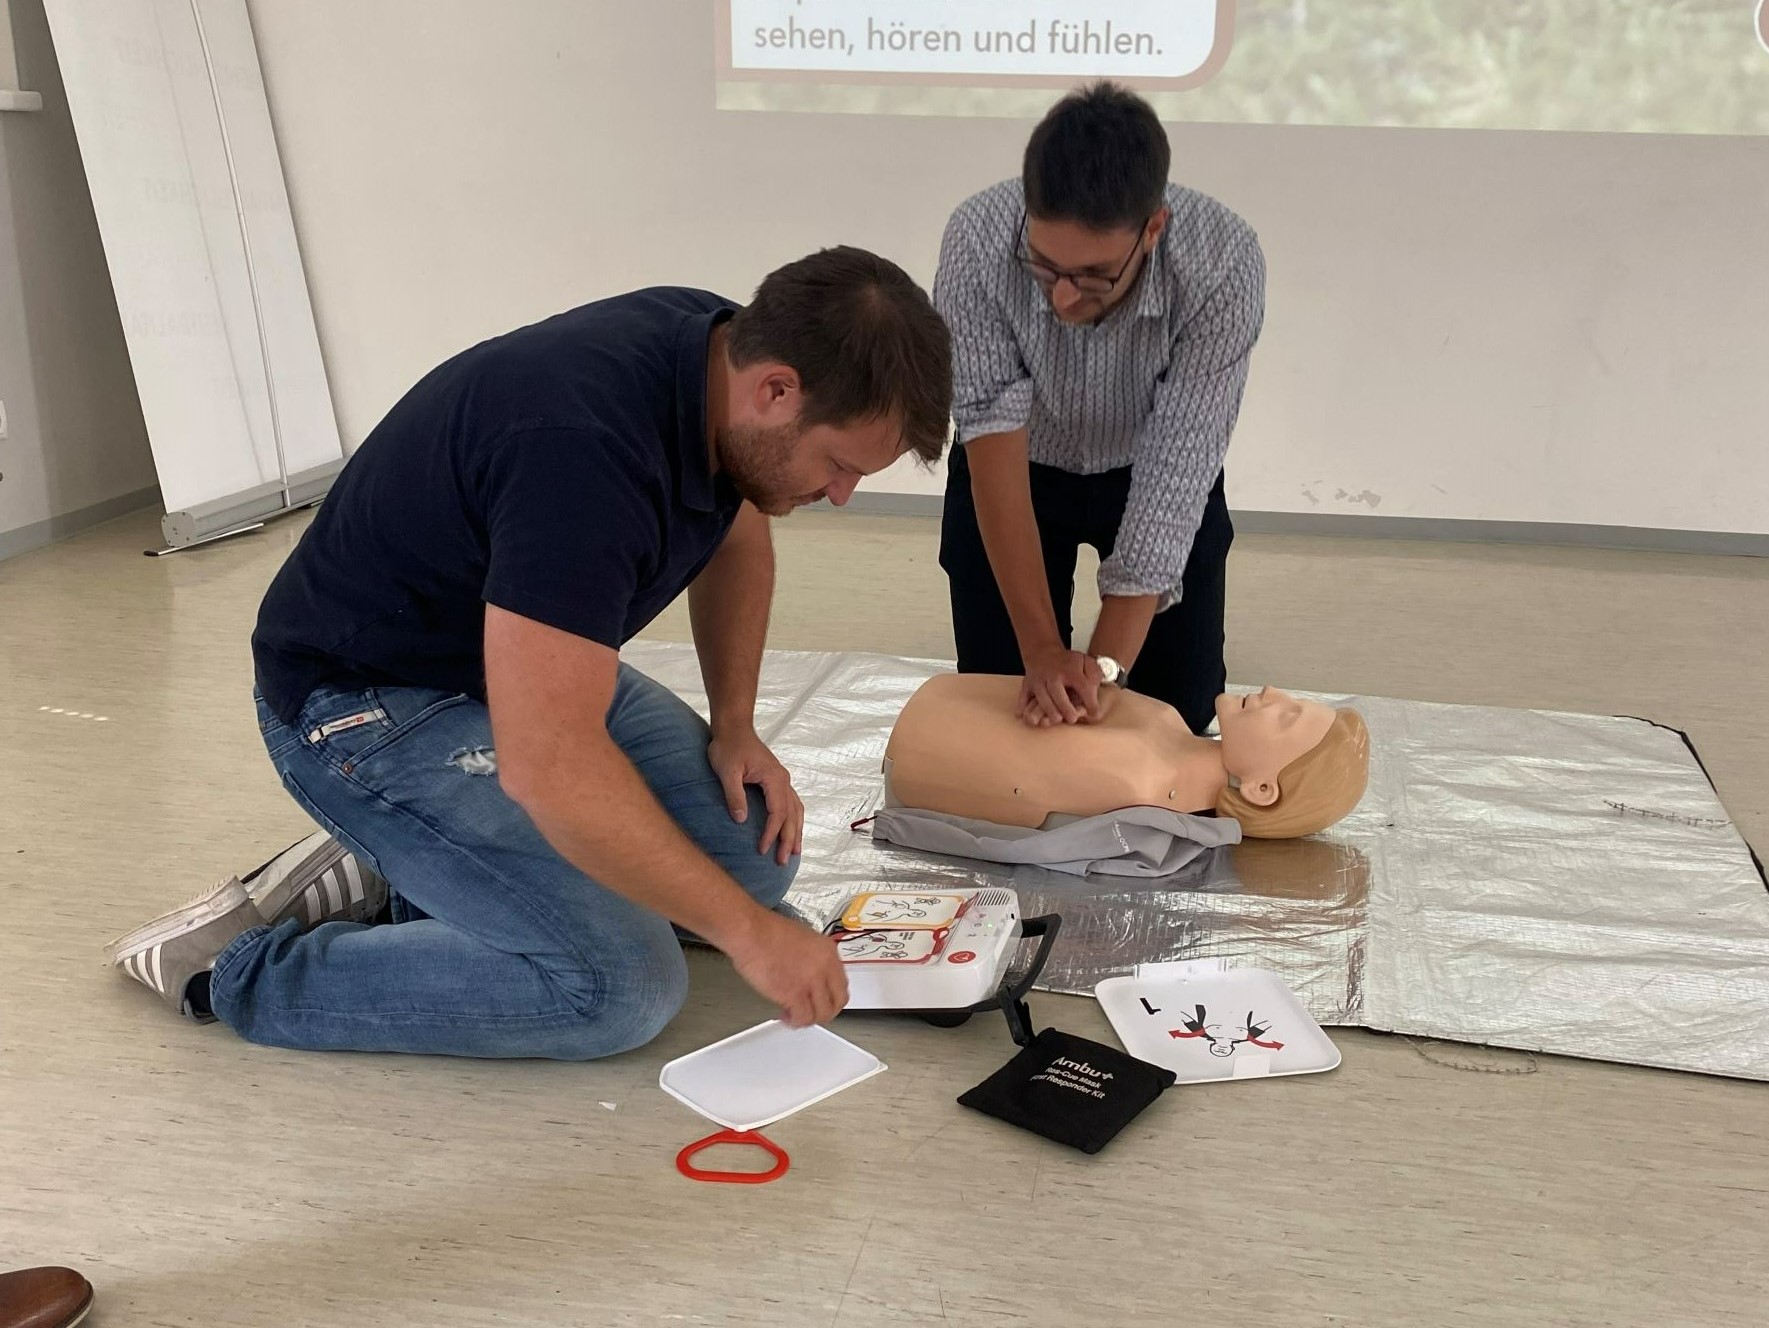 Refreshing first aid course